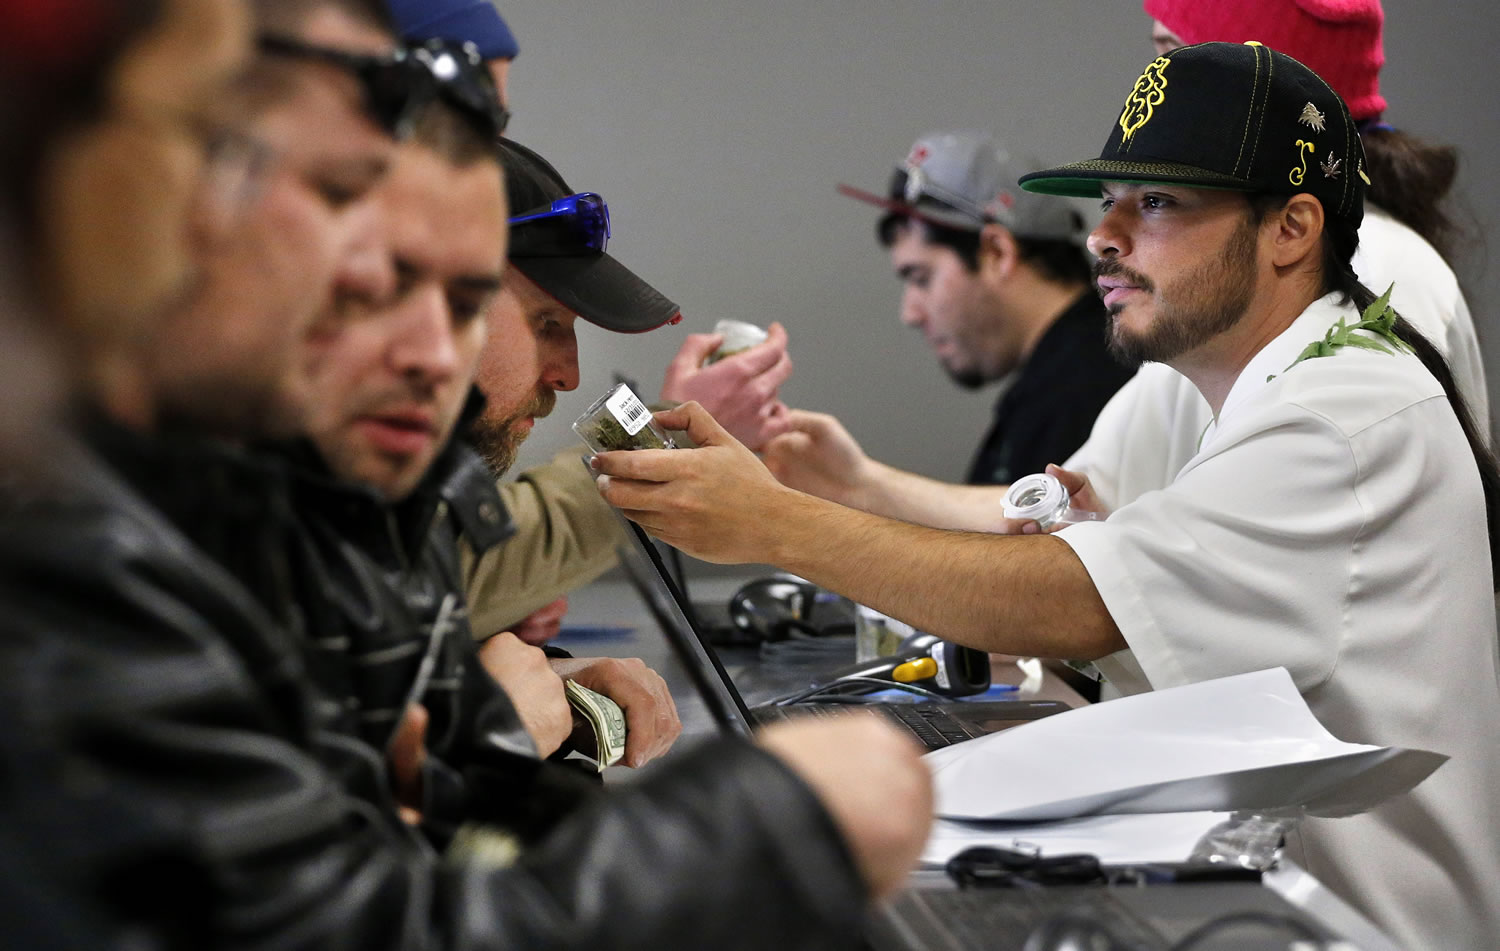 An employee right, helps a customer Jan. 1 at the crowded sales counter inside Medicine Man marijuana retail store in Denver. Colorado's top law enforcement official promises to vigorously defend the state's historic law legalizing marijuana after Nebraska and Oklahoma asked the U.S. Supreme Court to declare it unconstitutional, saying the drug is freely flowing into neighboring states.